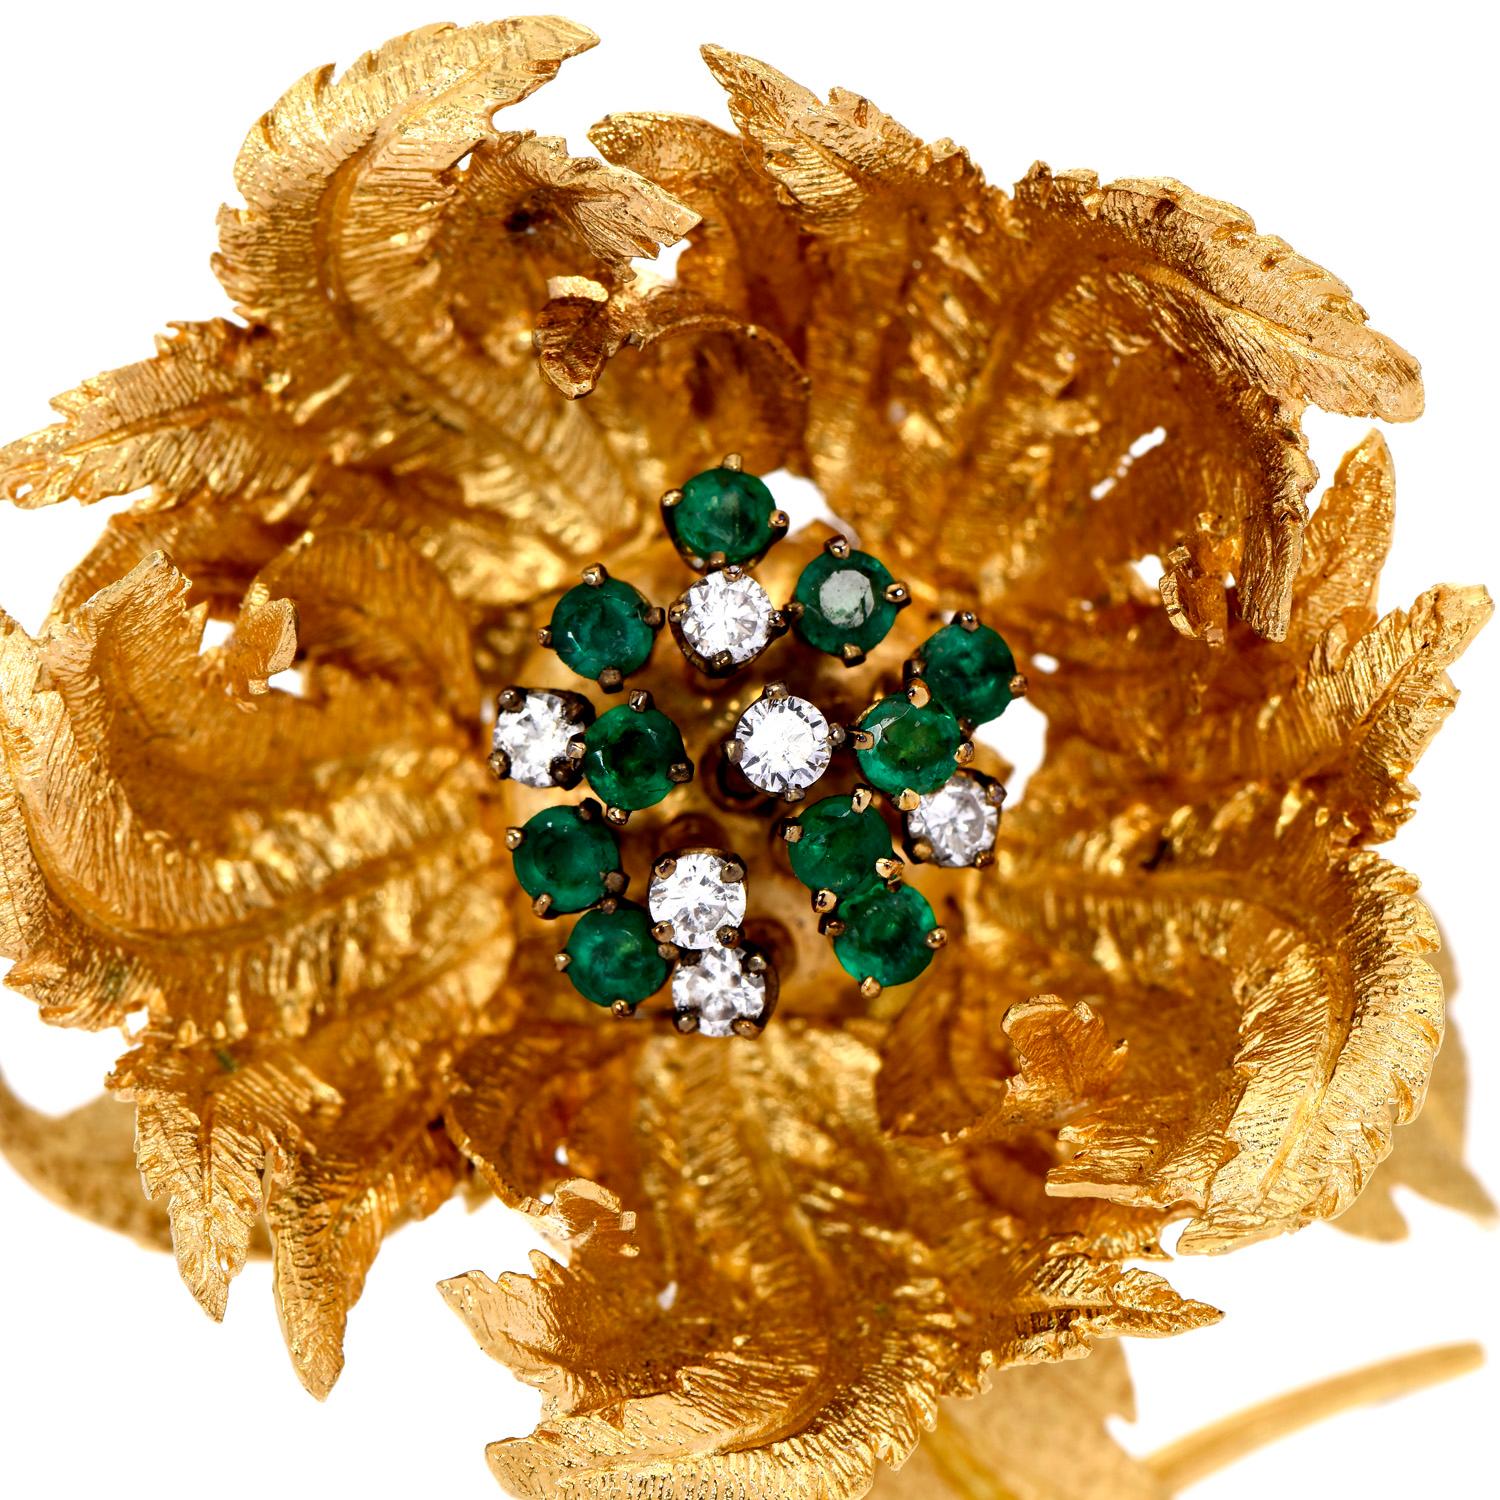 The Hammerman Brothers have outstanding Unique pieces and this Large  Flower Inspired brooch,

Crafted in Solid 18K Yellow Gold,

This retro Brooch with Movable Petals is adorned with 6 Round Cut Diamonds of approx 0.30 carats, G-H  Color